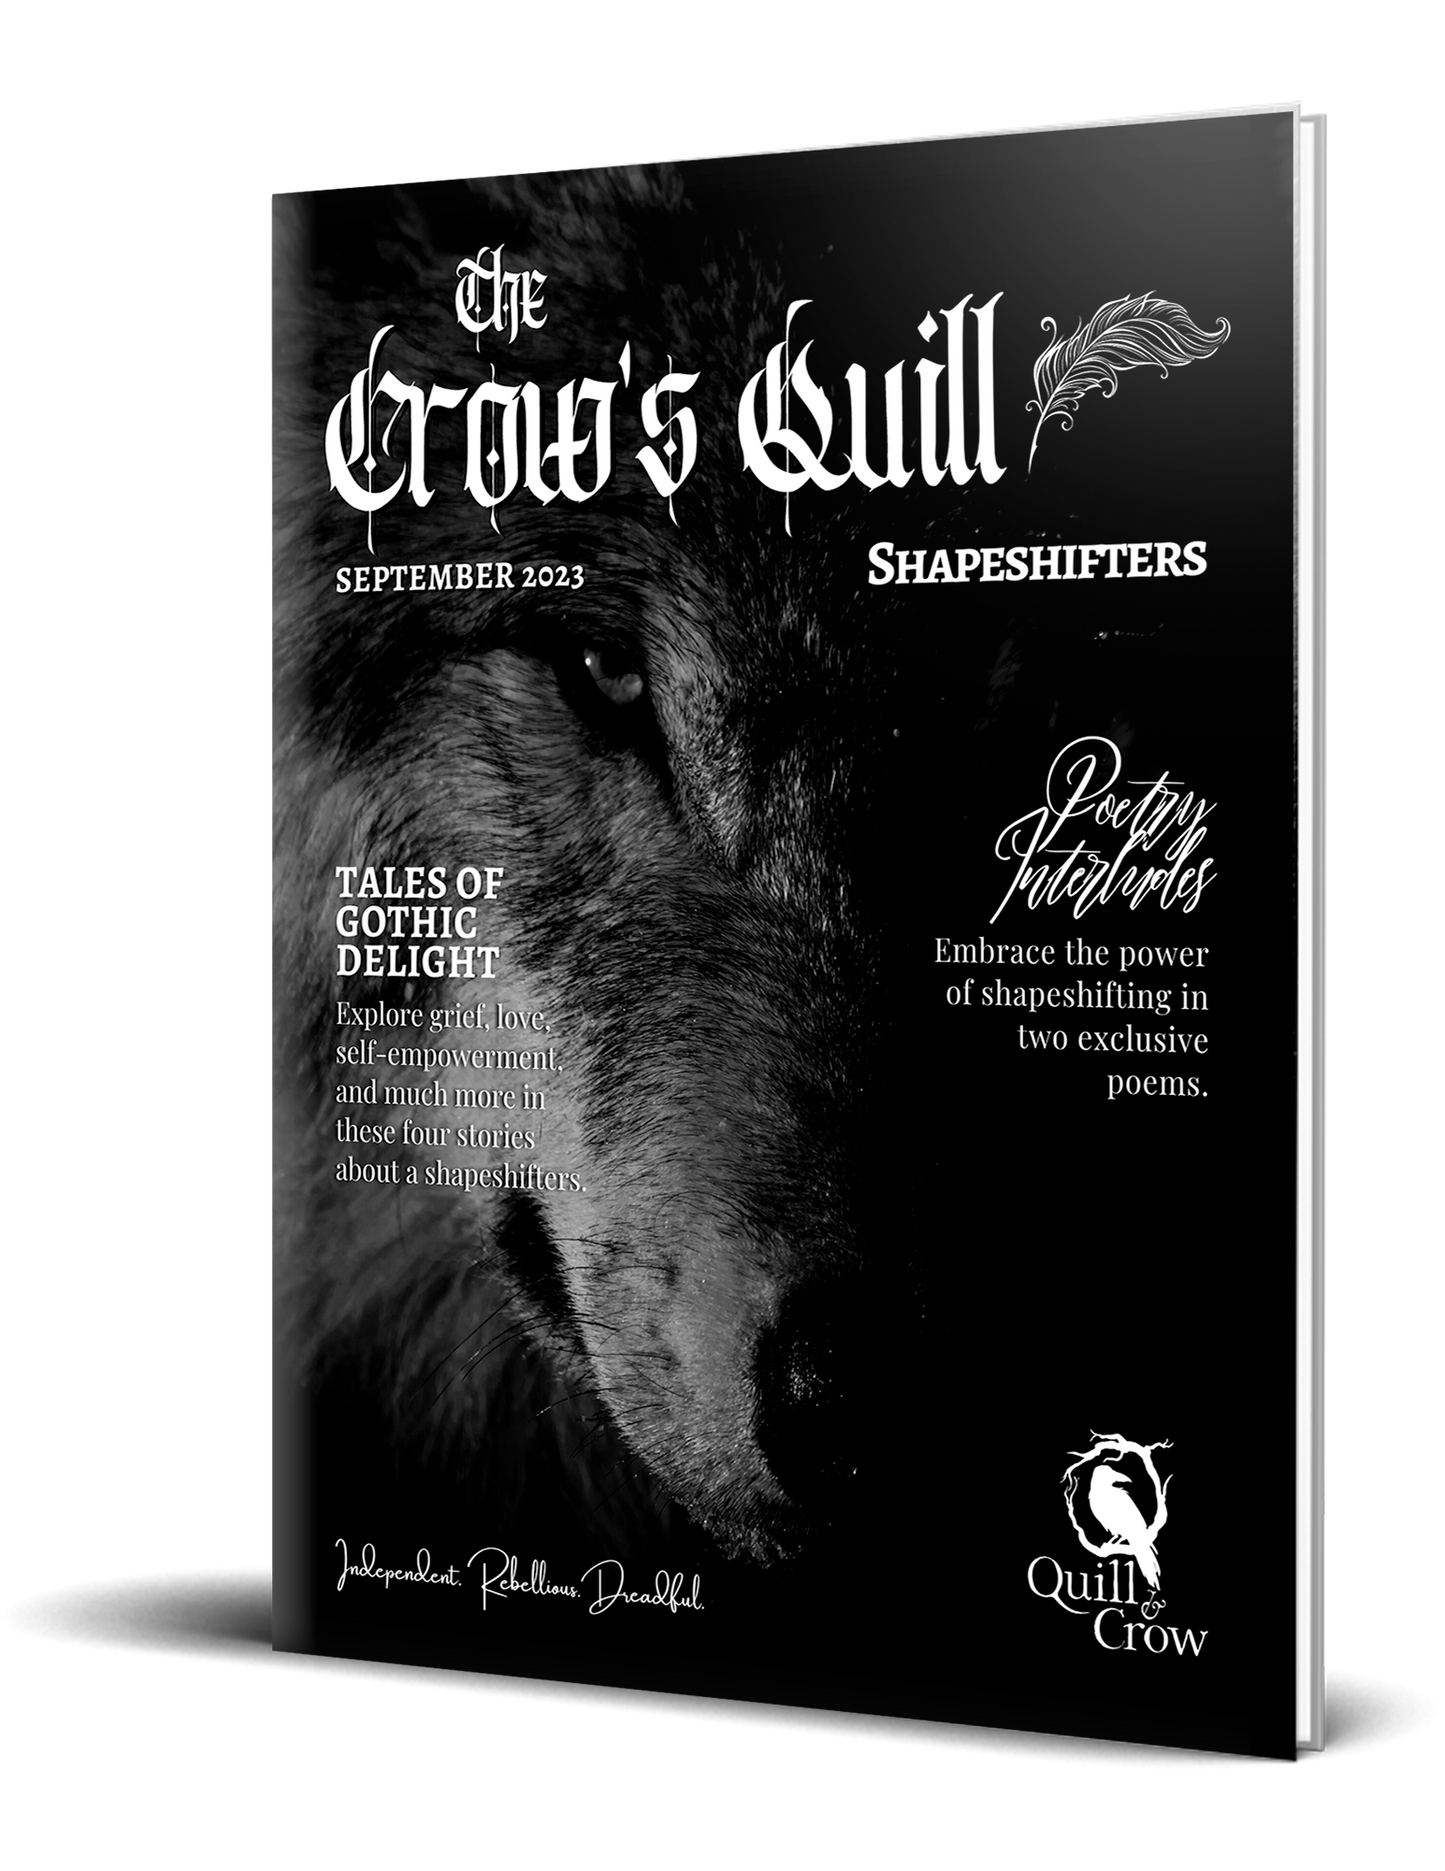 The Crow's Quill Magazine: Issue 26